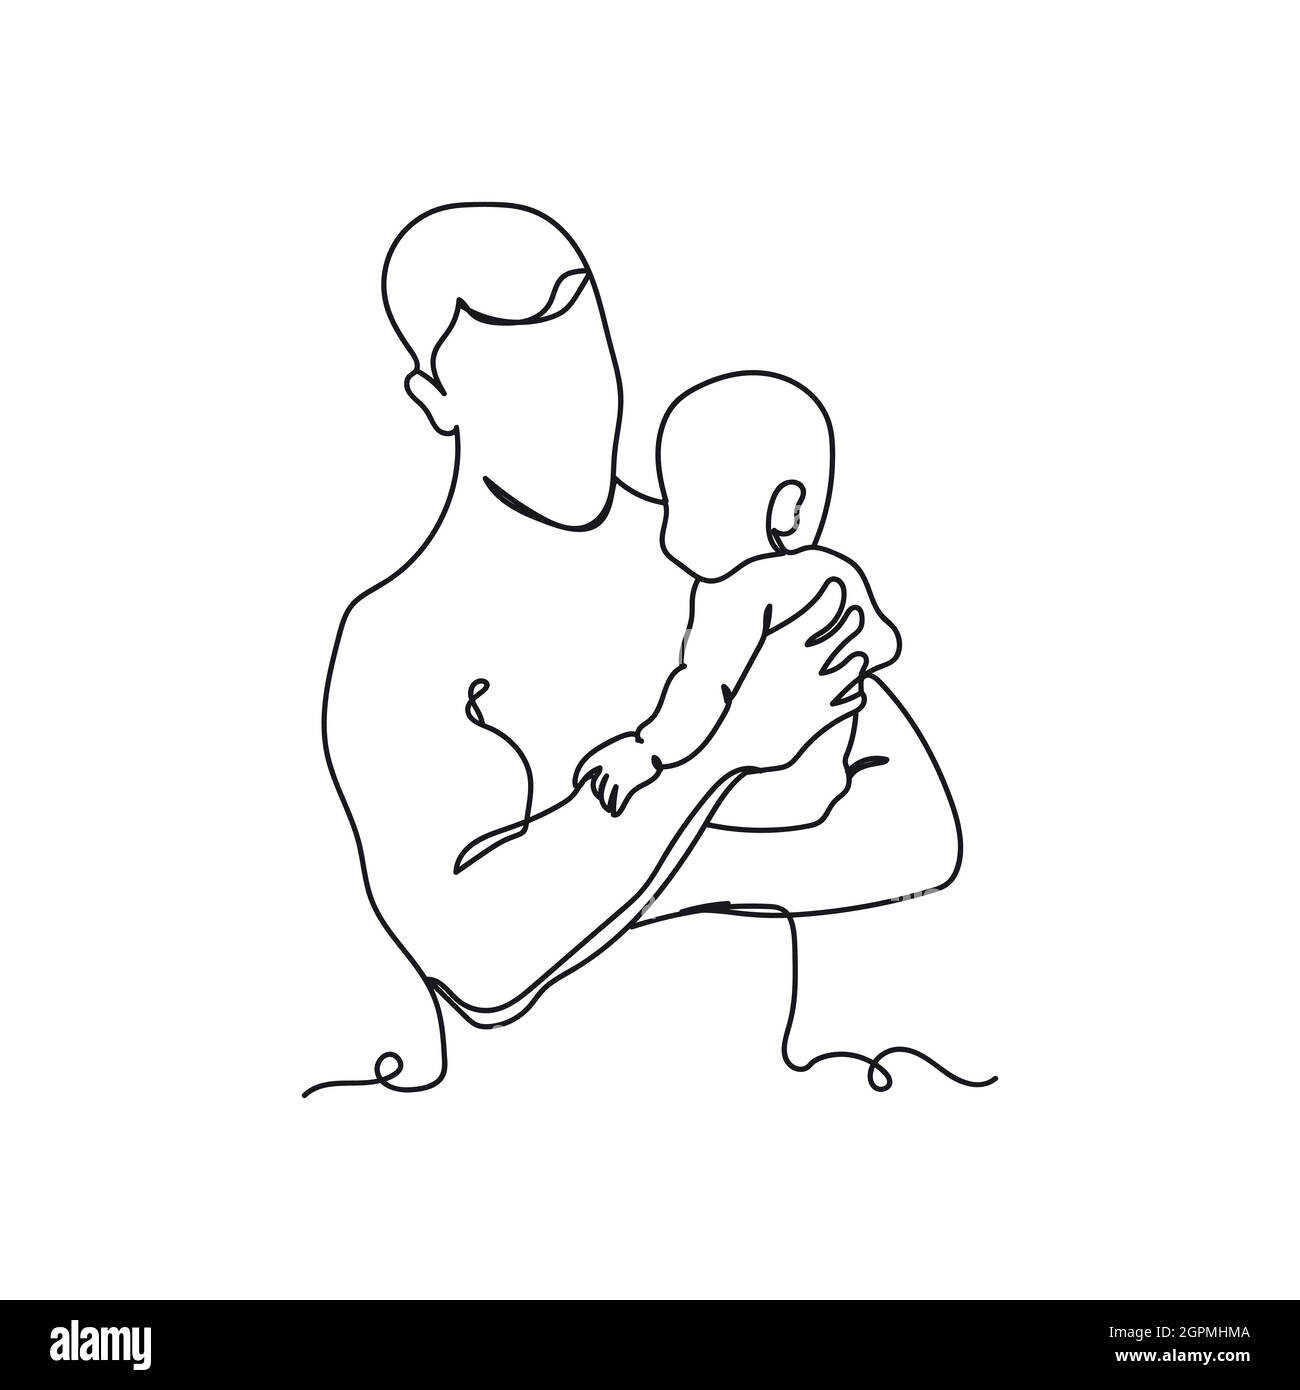 Continuous one line of father and baby in silhouette. Minimal style. Perfect for cards, party invitations, posters, stickers, clothing. Black abstract icon. Stock Vector